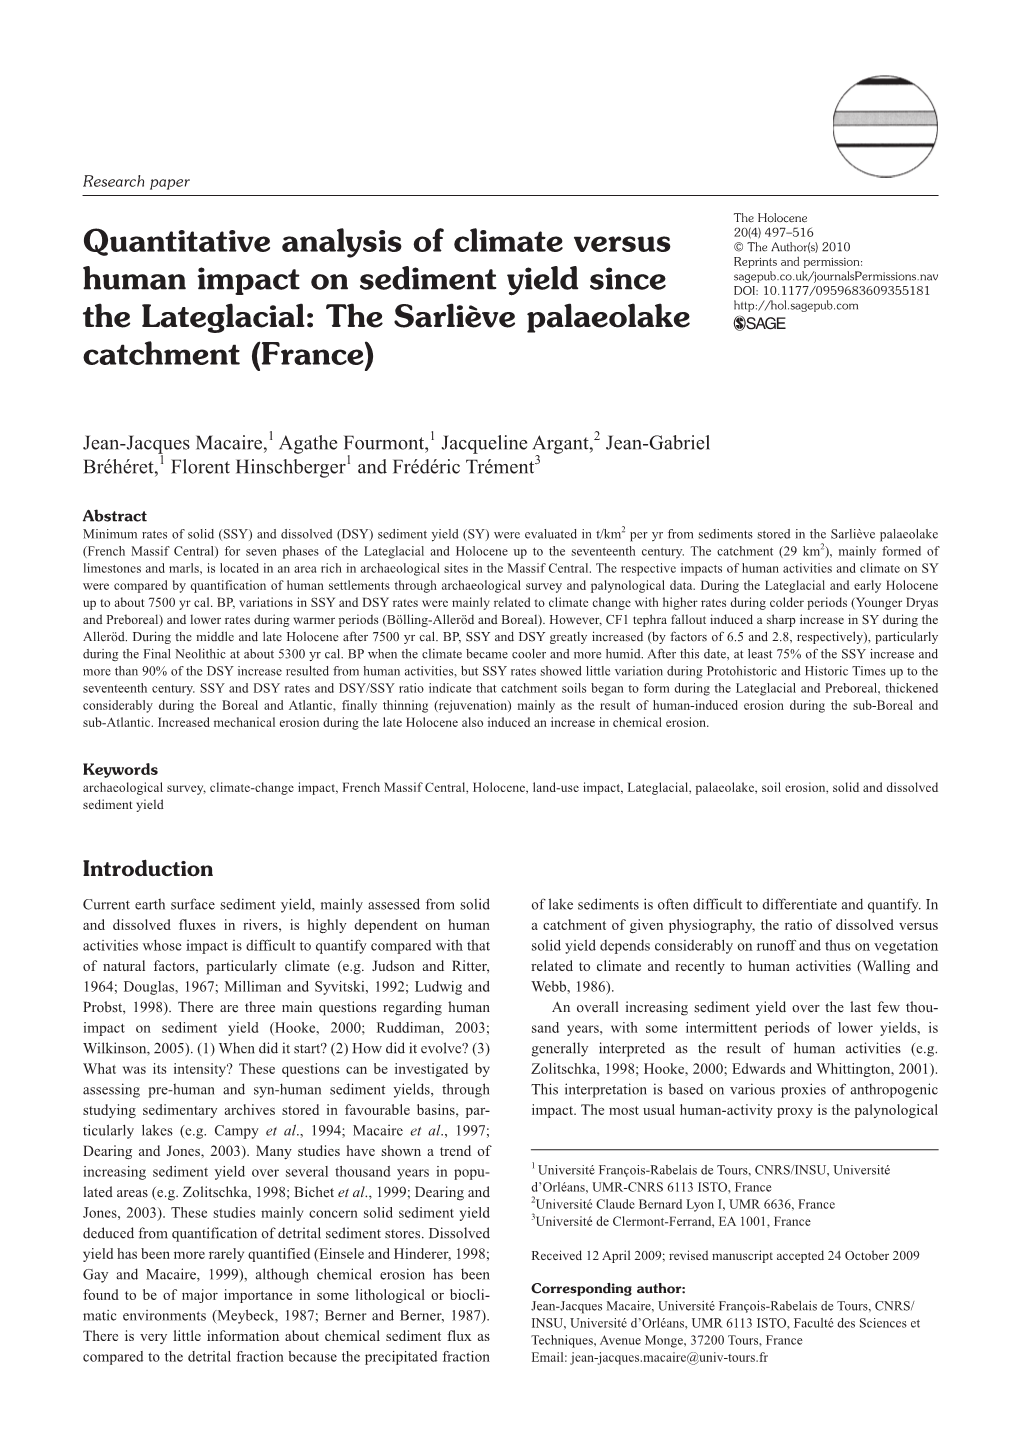 Quantitative Analysis of Climate Versus Human Impact on Sediment Yield Since the Lateglacial: the Sarliève Palaeolake Catchment